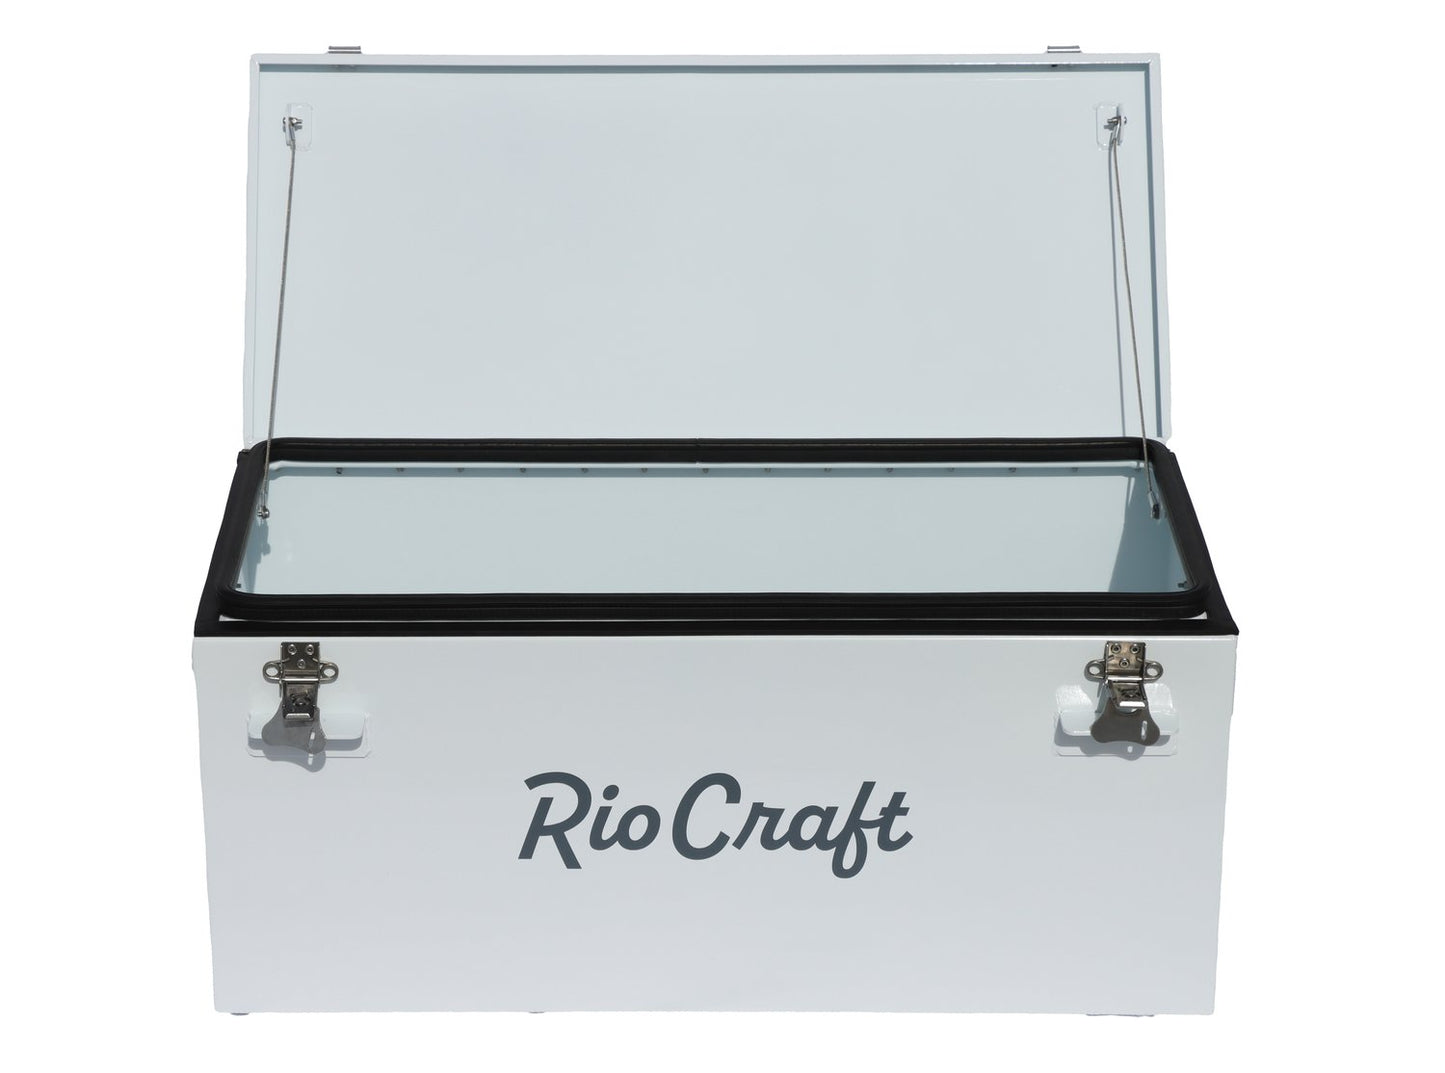 A white cooler with the brand name "Rio Craft" on it, providing maximum security and protection with its Powder-Coated Aluminum Drybox acting as a protective buffer.